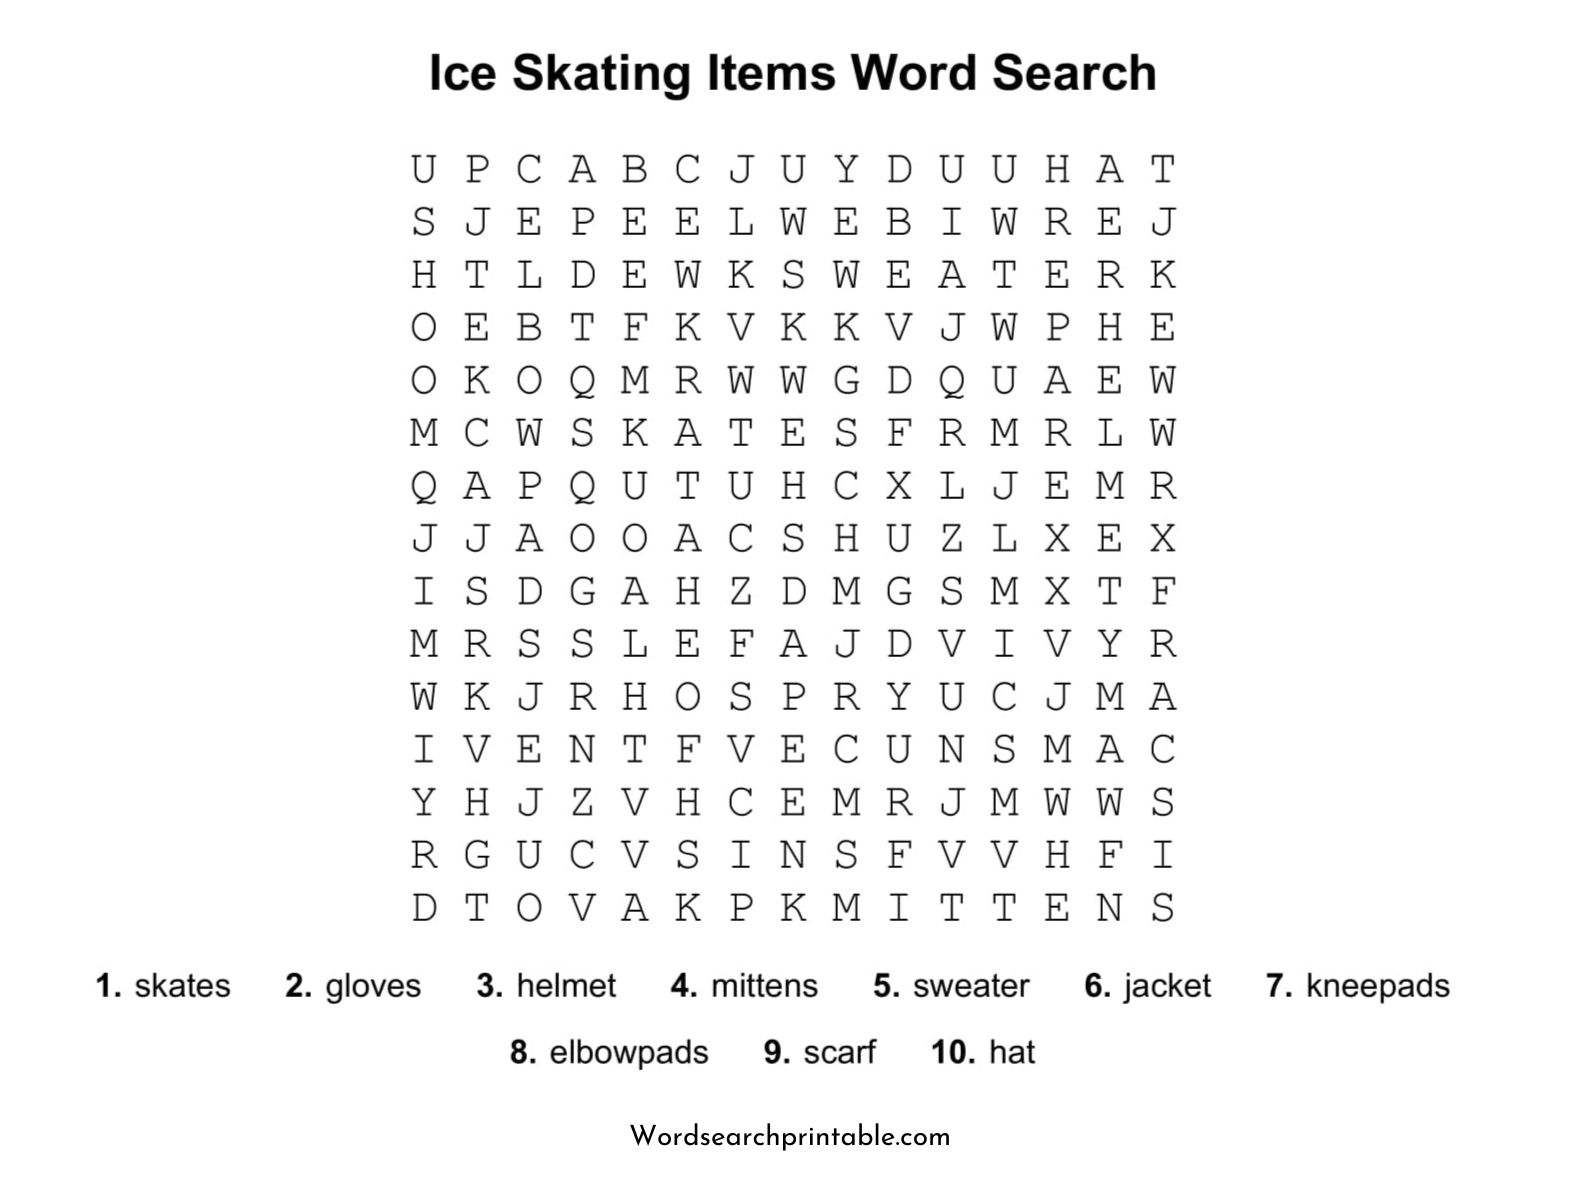 ice skating items word search puzzle